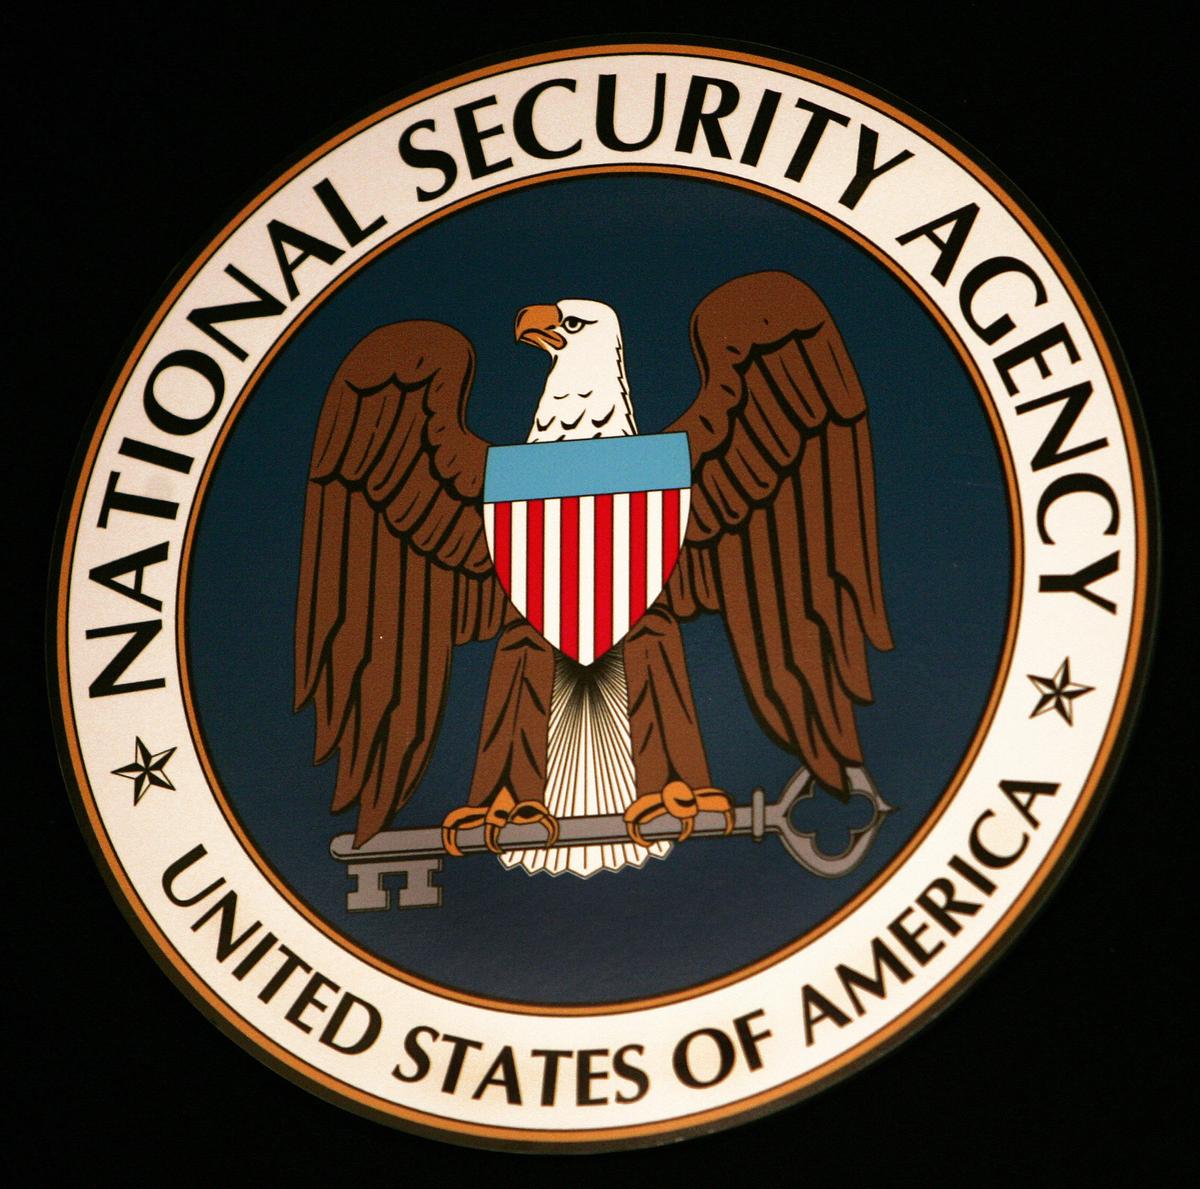 The seal of the National Security Agency. (PAUL J. RICHARDS/AFP/Getty Images)